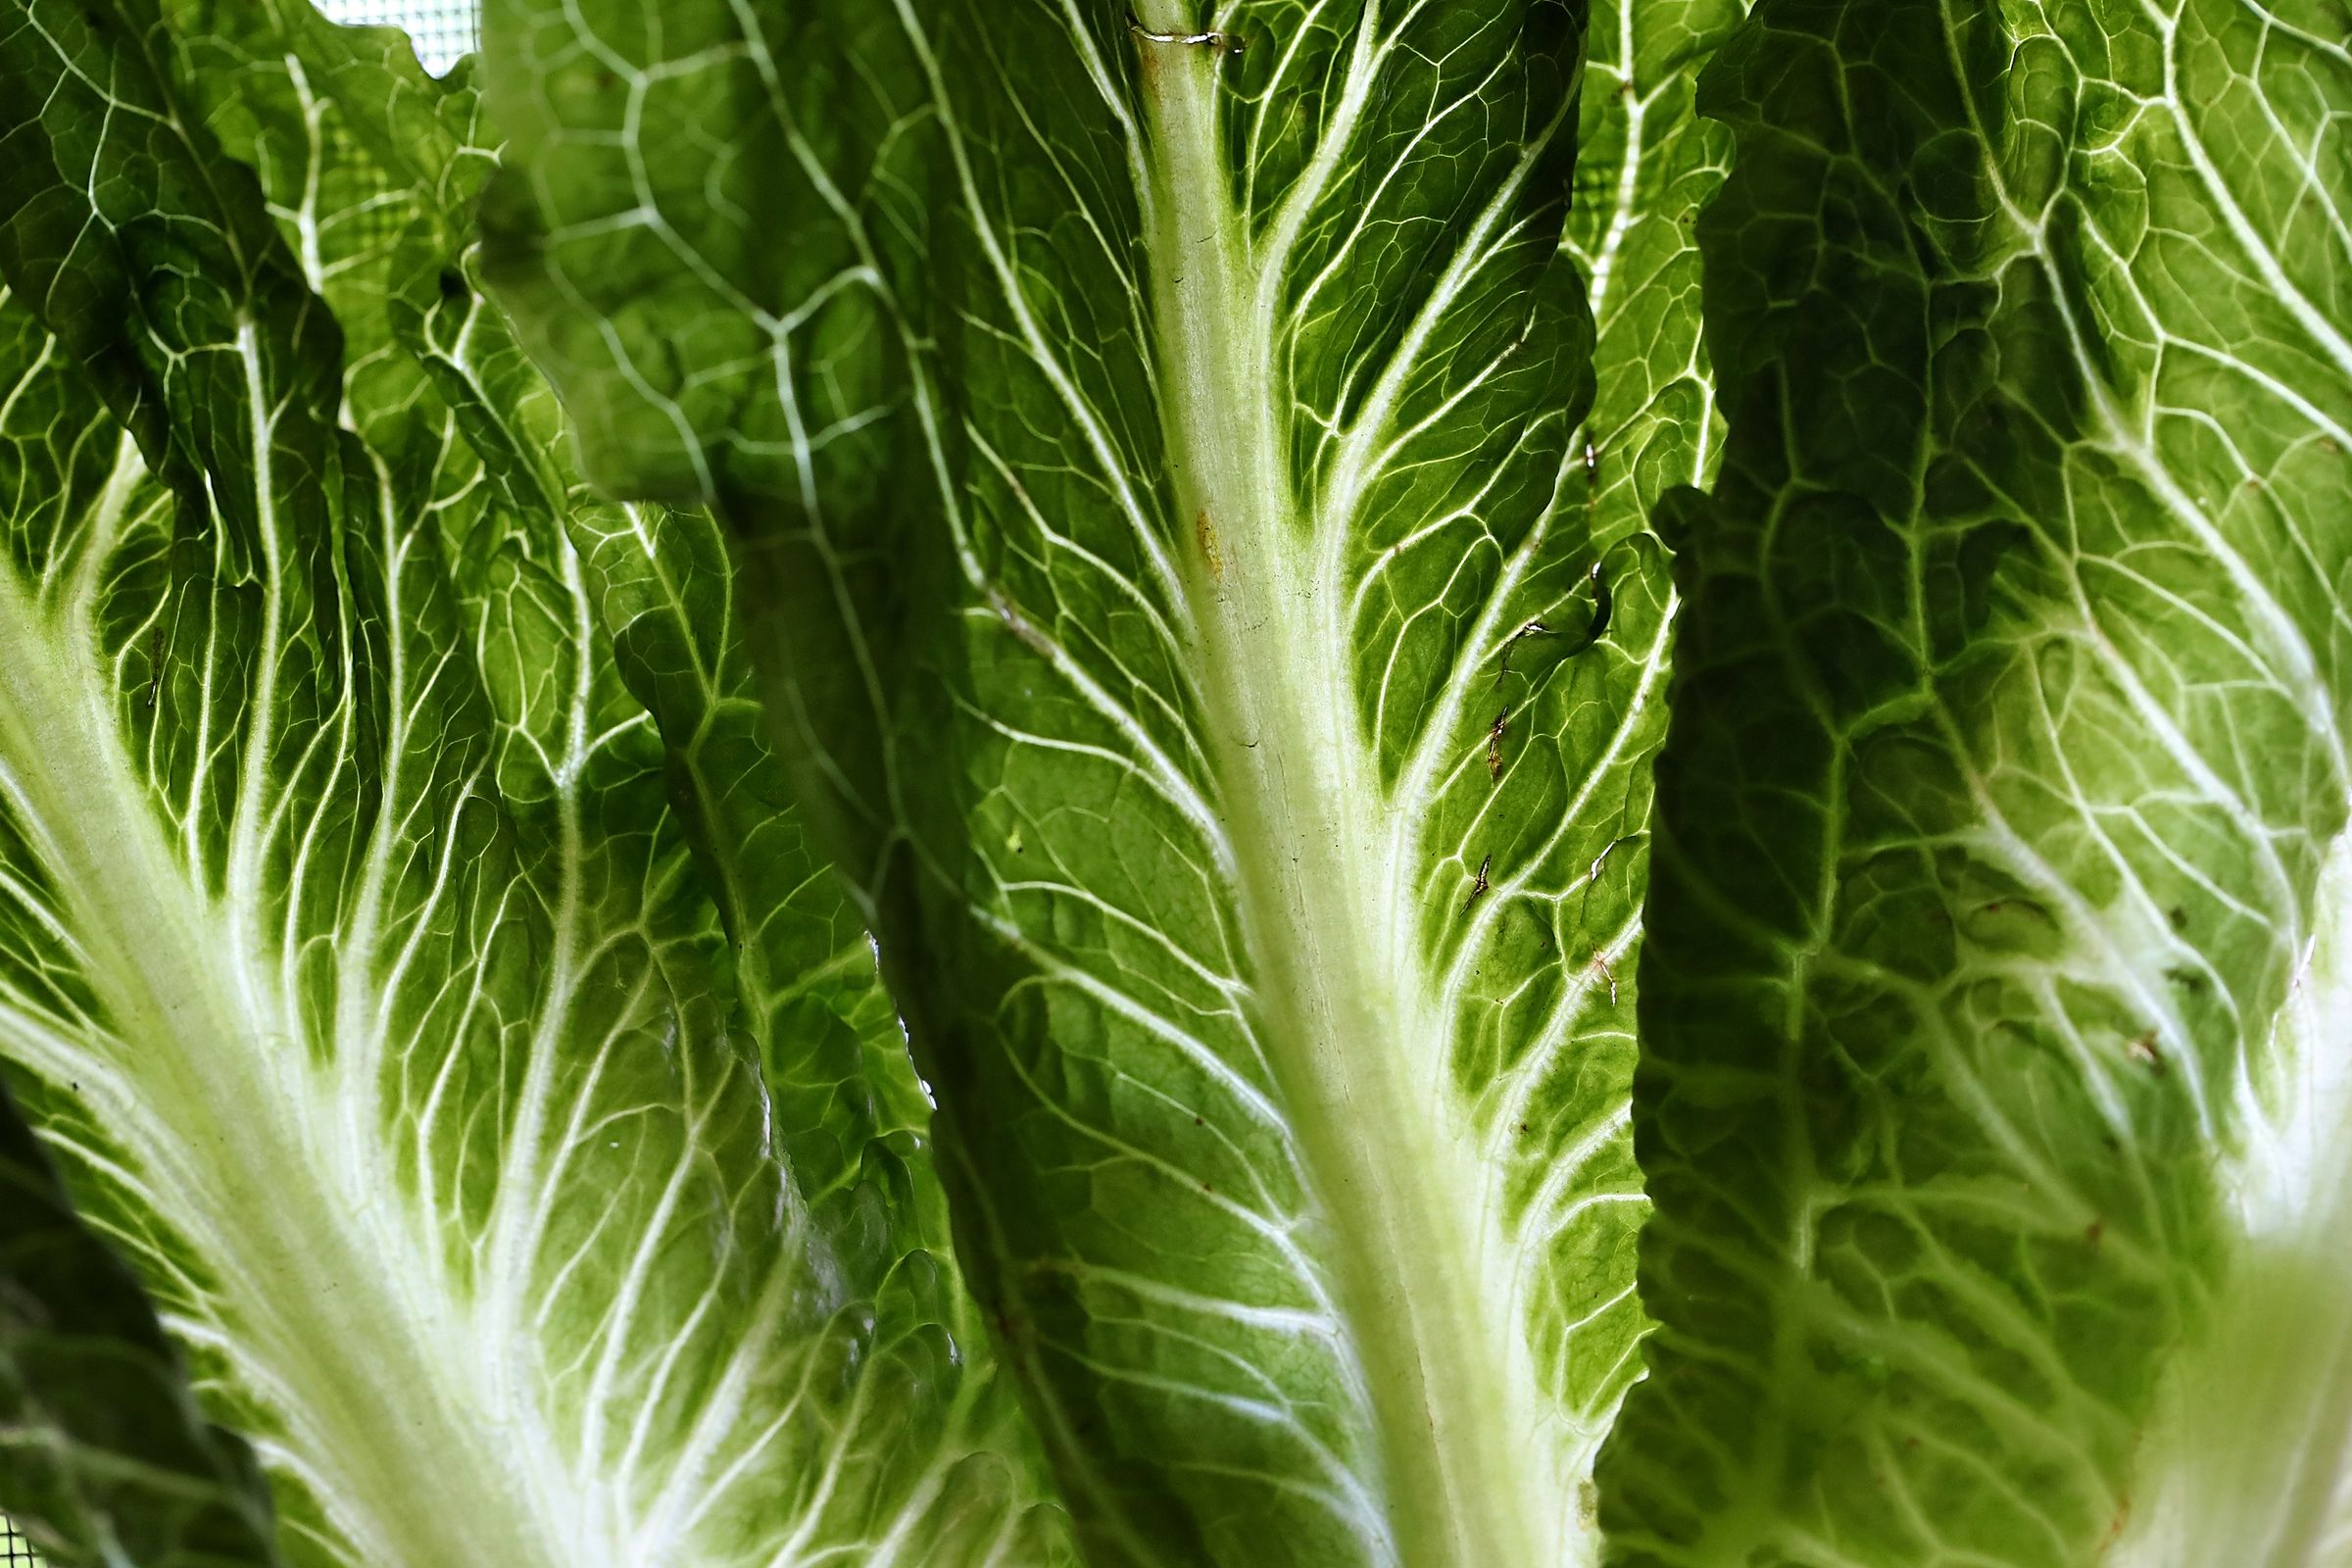 Romaine lettuce linked to another dangerous E. coli outbreak